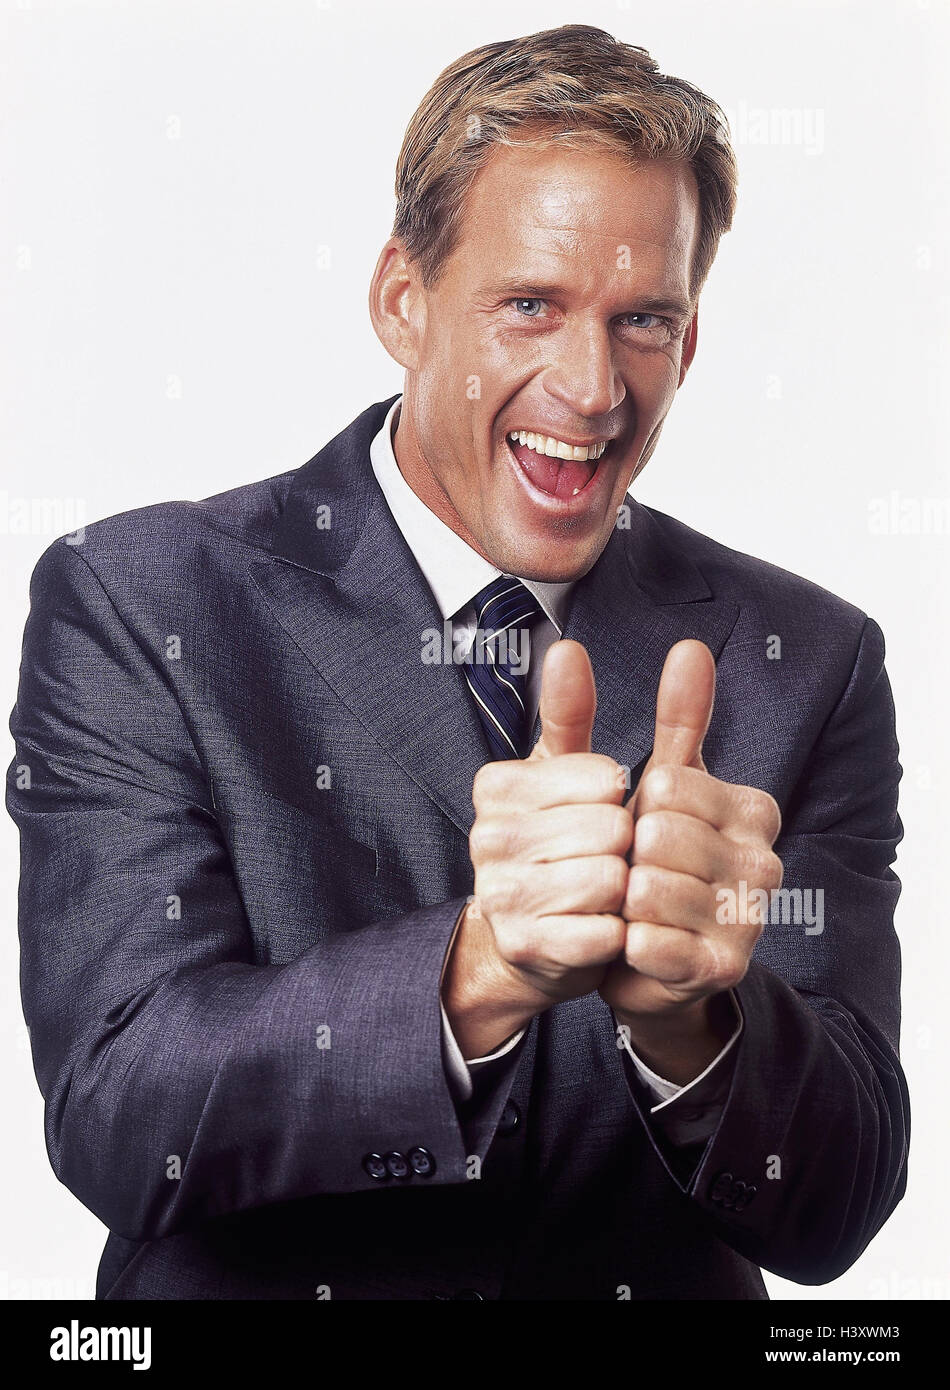 Man, suit, tie, laugh, gesture, joy, pollex, high men, cheering, success, certainly about victory, self-confidently, successfully, rejoice, glad, body language, gesture, positively, studio, cut out, okay, OK Stock Photo